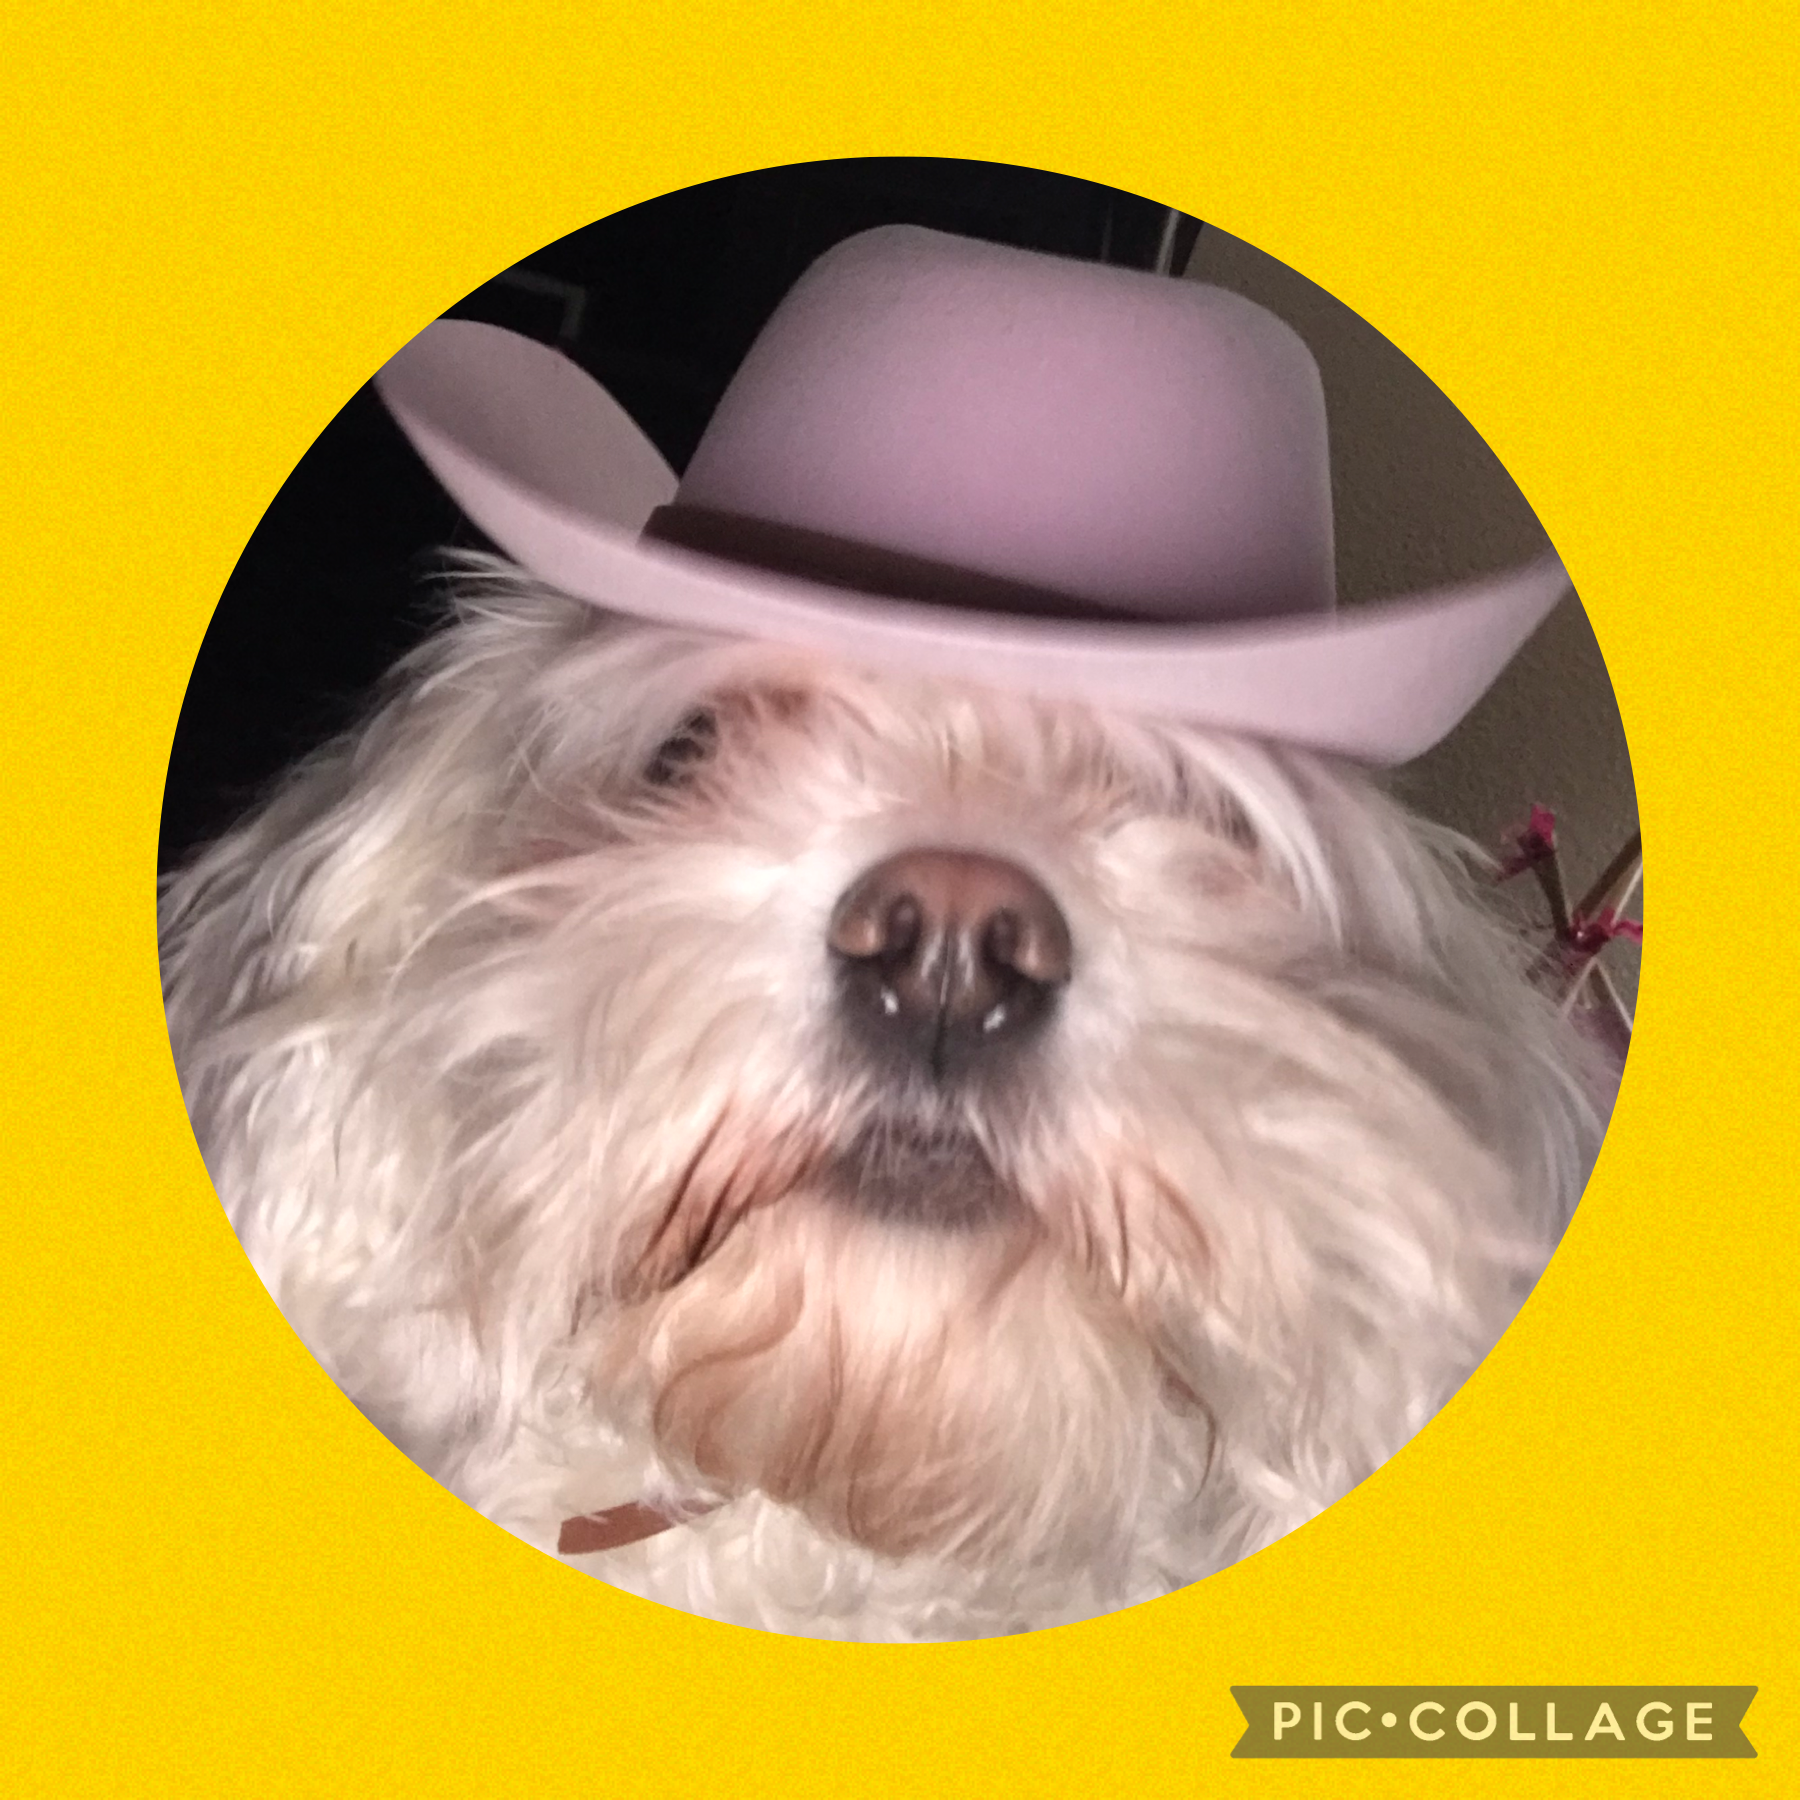 This is Holly, my mom’s dog. She decided to take my phone without my knowing and take a selfie with a cowgirl hat on😂